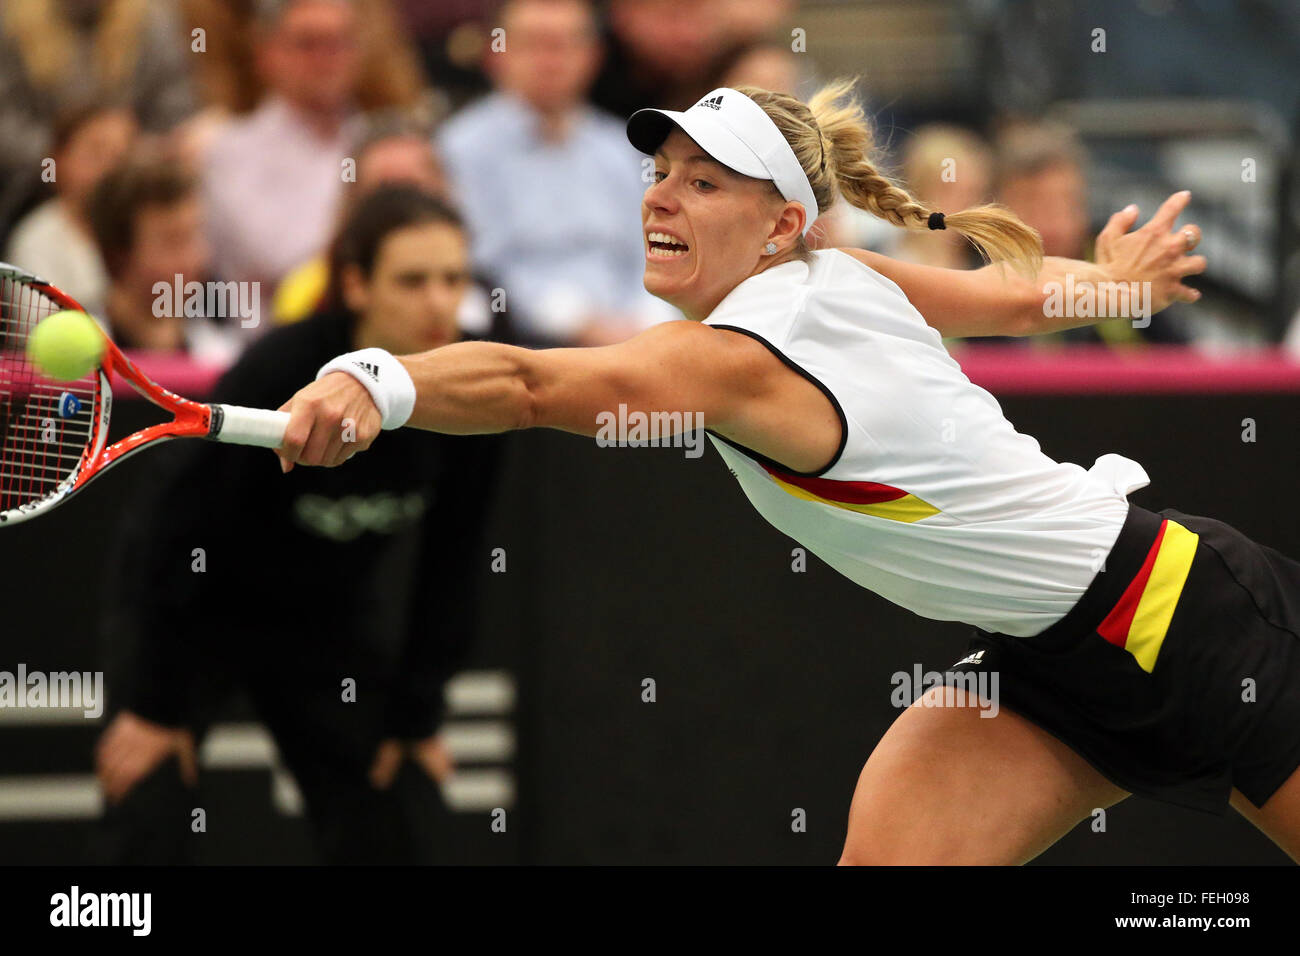 Leipzig, Germany. 06th Feb, 2016. Germany's Angelique Kerber in action against Switzerland's Timea Bacsinszky (not pictured) at the Fed Cup tennis quarterfinal between Germany and Switzerland in Leipzig, Germany, 06 February 2016. Photo: JAN WOITAS/dpa/Alamy Live News Stock Photo